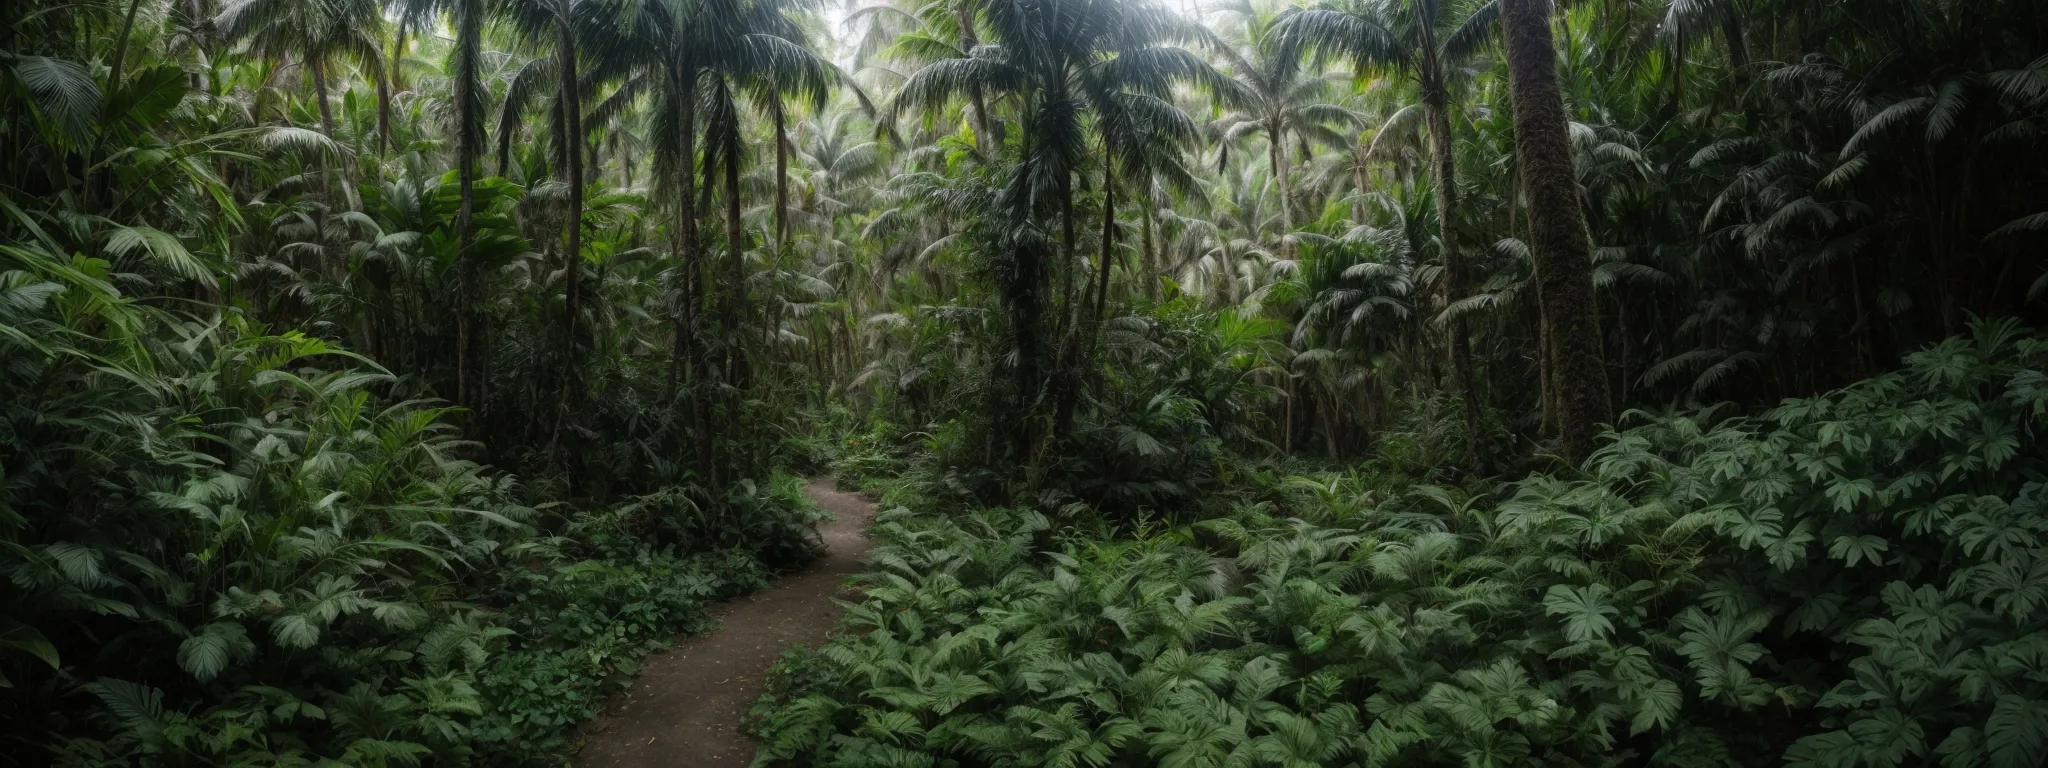 a path winding through a dense, lush jungle opening to a clear direction ahead.